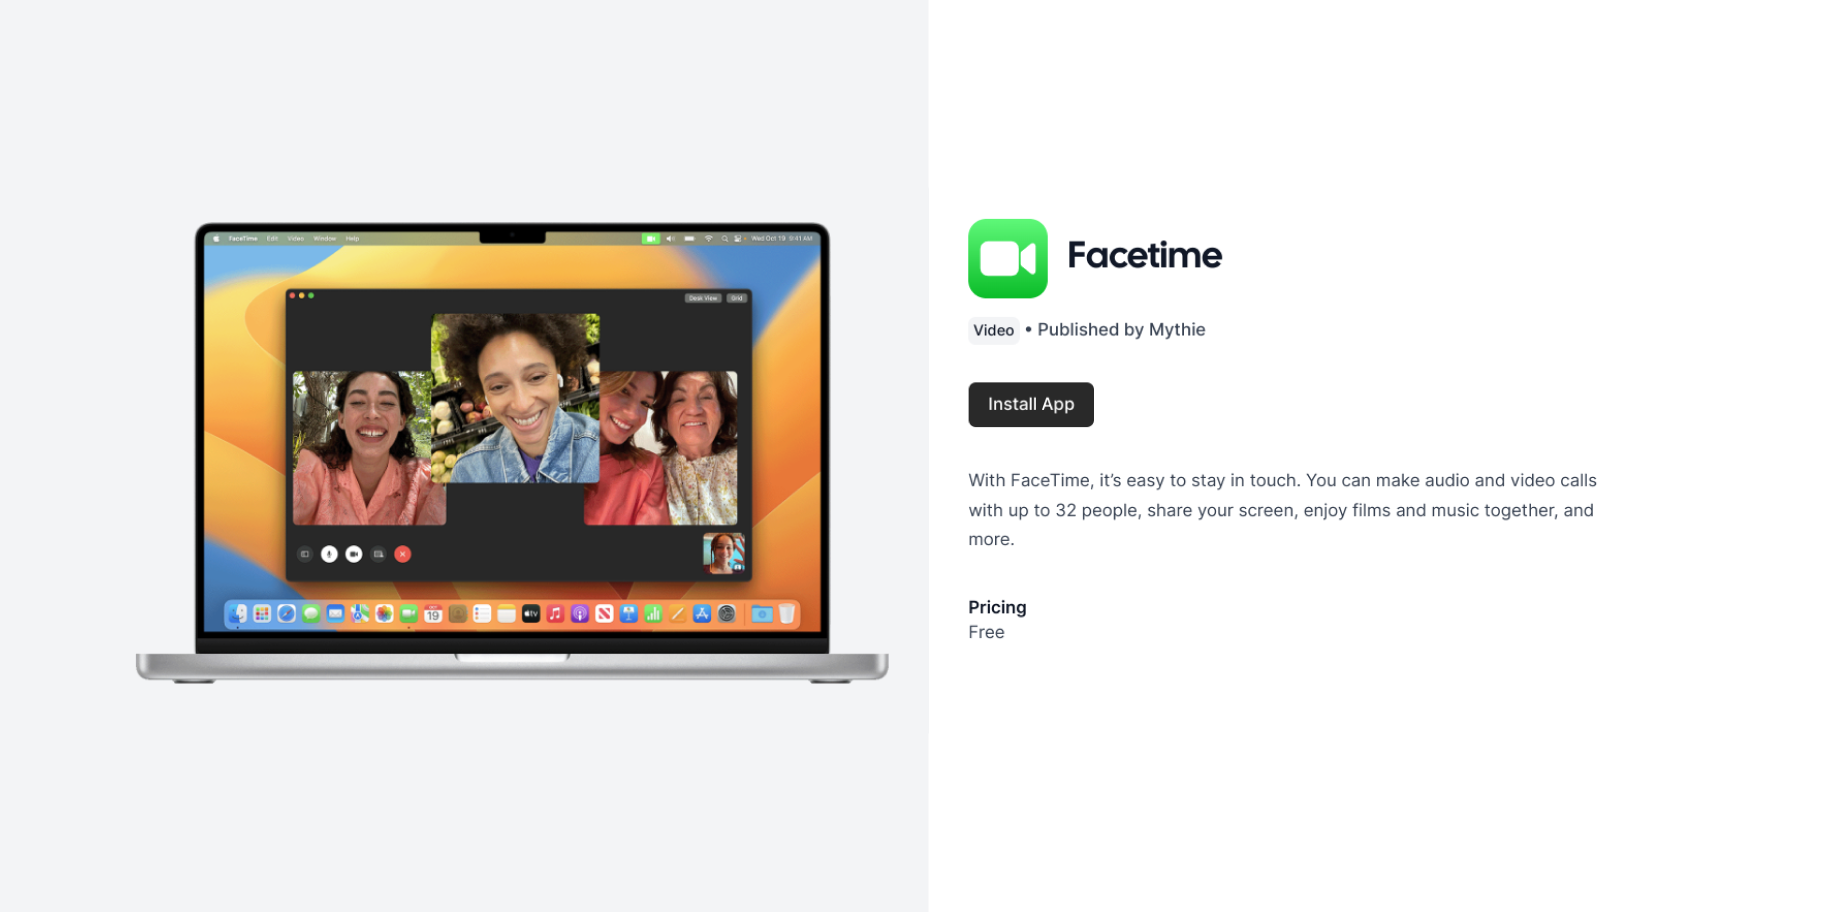 You can now create Facetime compatible Cal.com events.